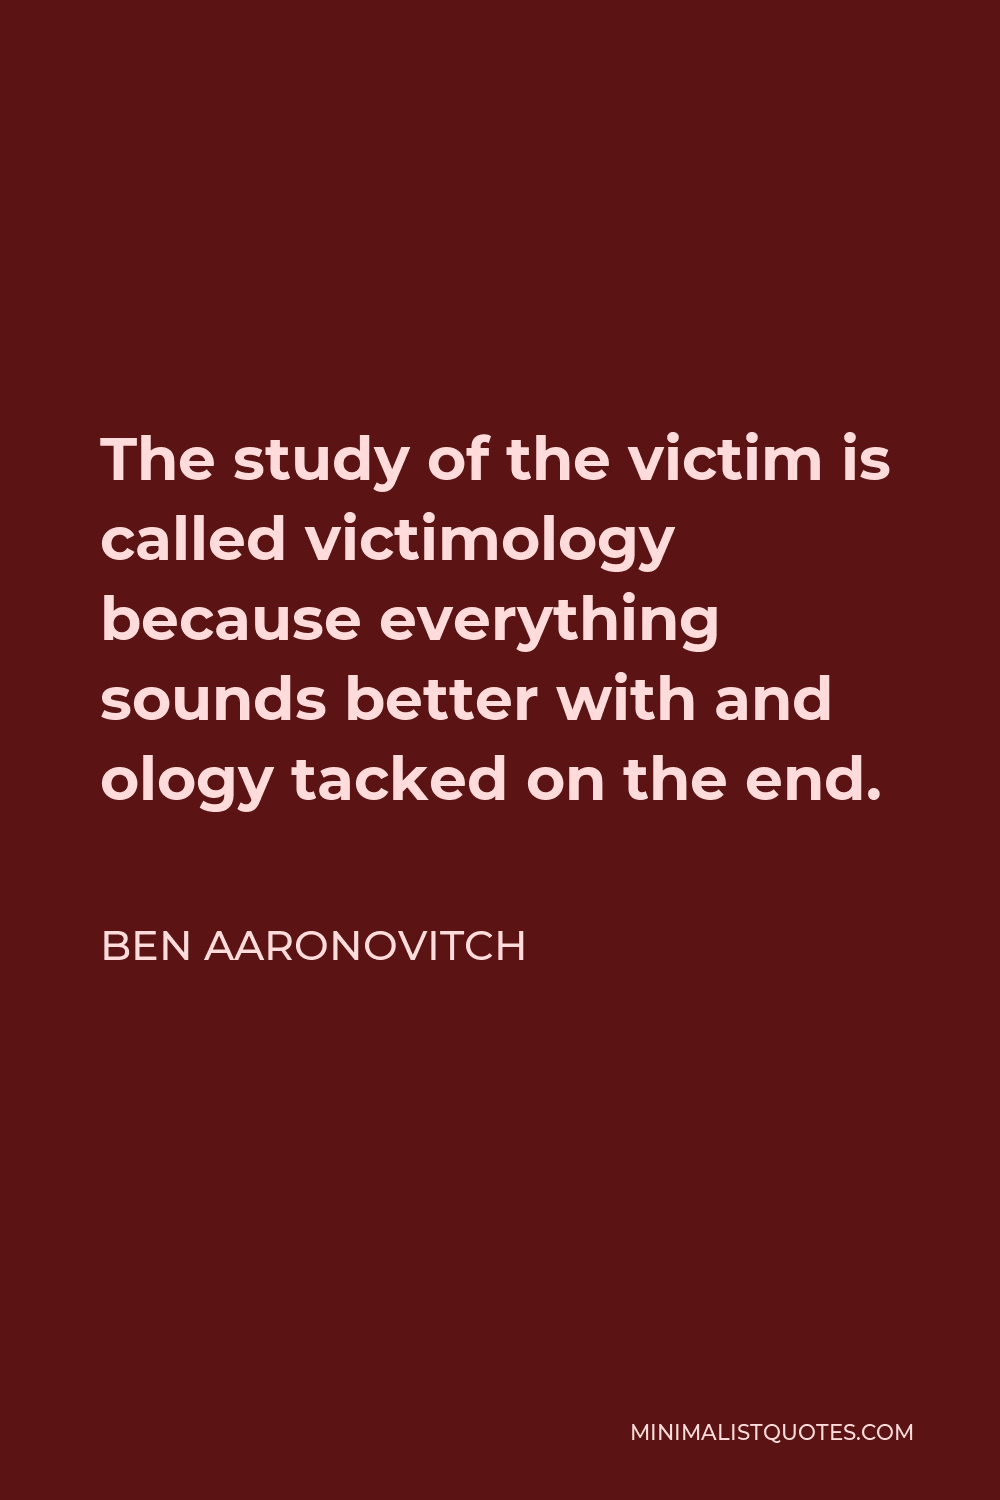 Ben Aaronovitch Quote - The study of the victim is called victimology because everything sounds better with and ology tacked on the end.